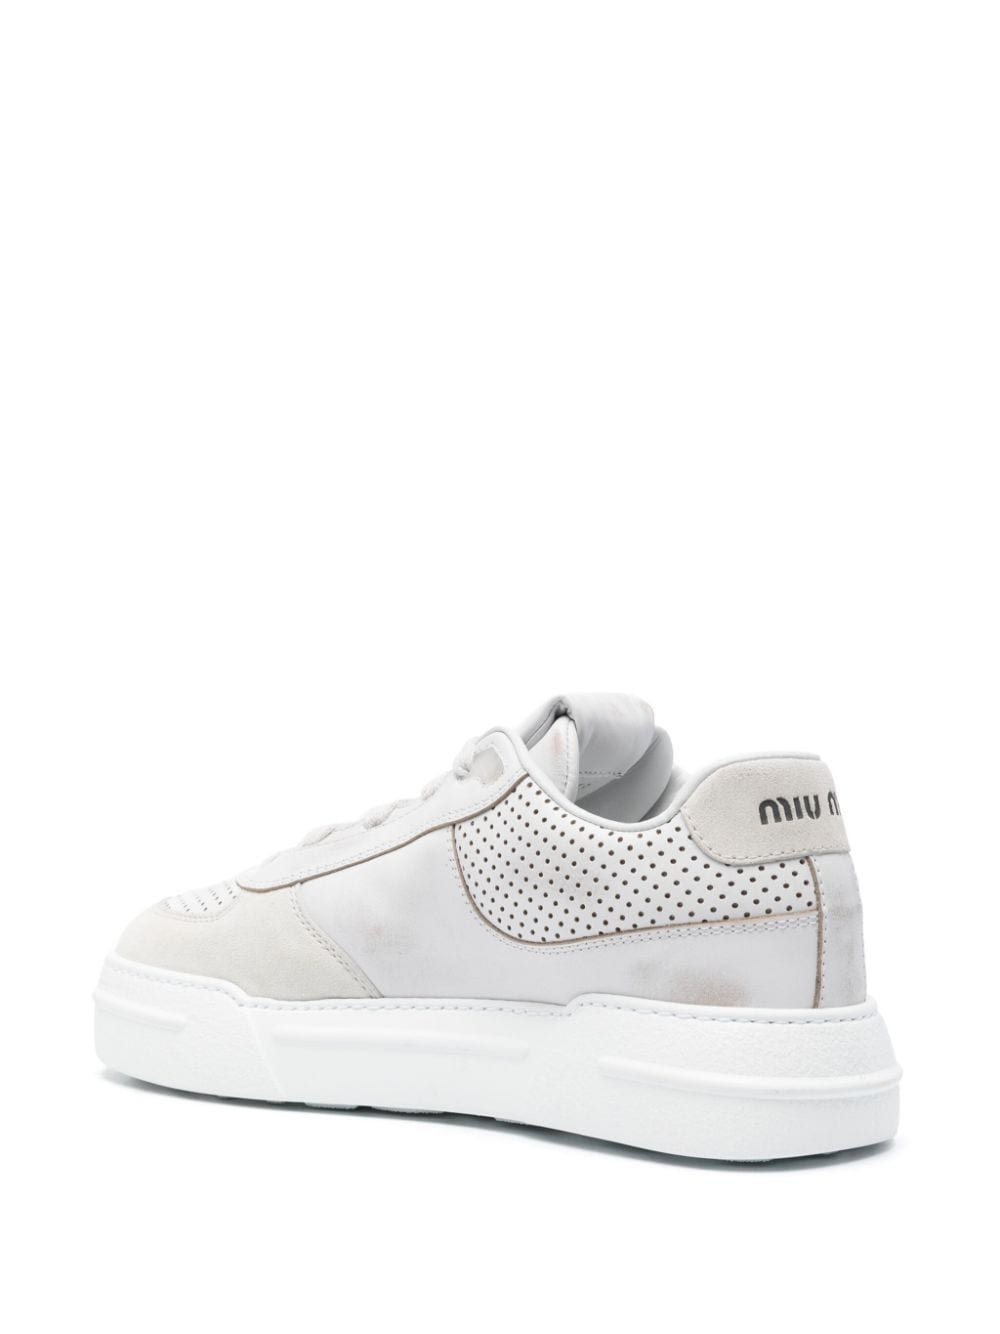 Logo-print leather sneakers<BR/><BR/><BR/>